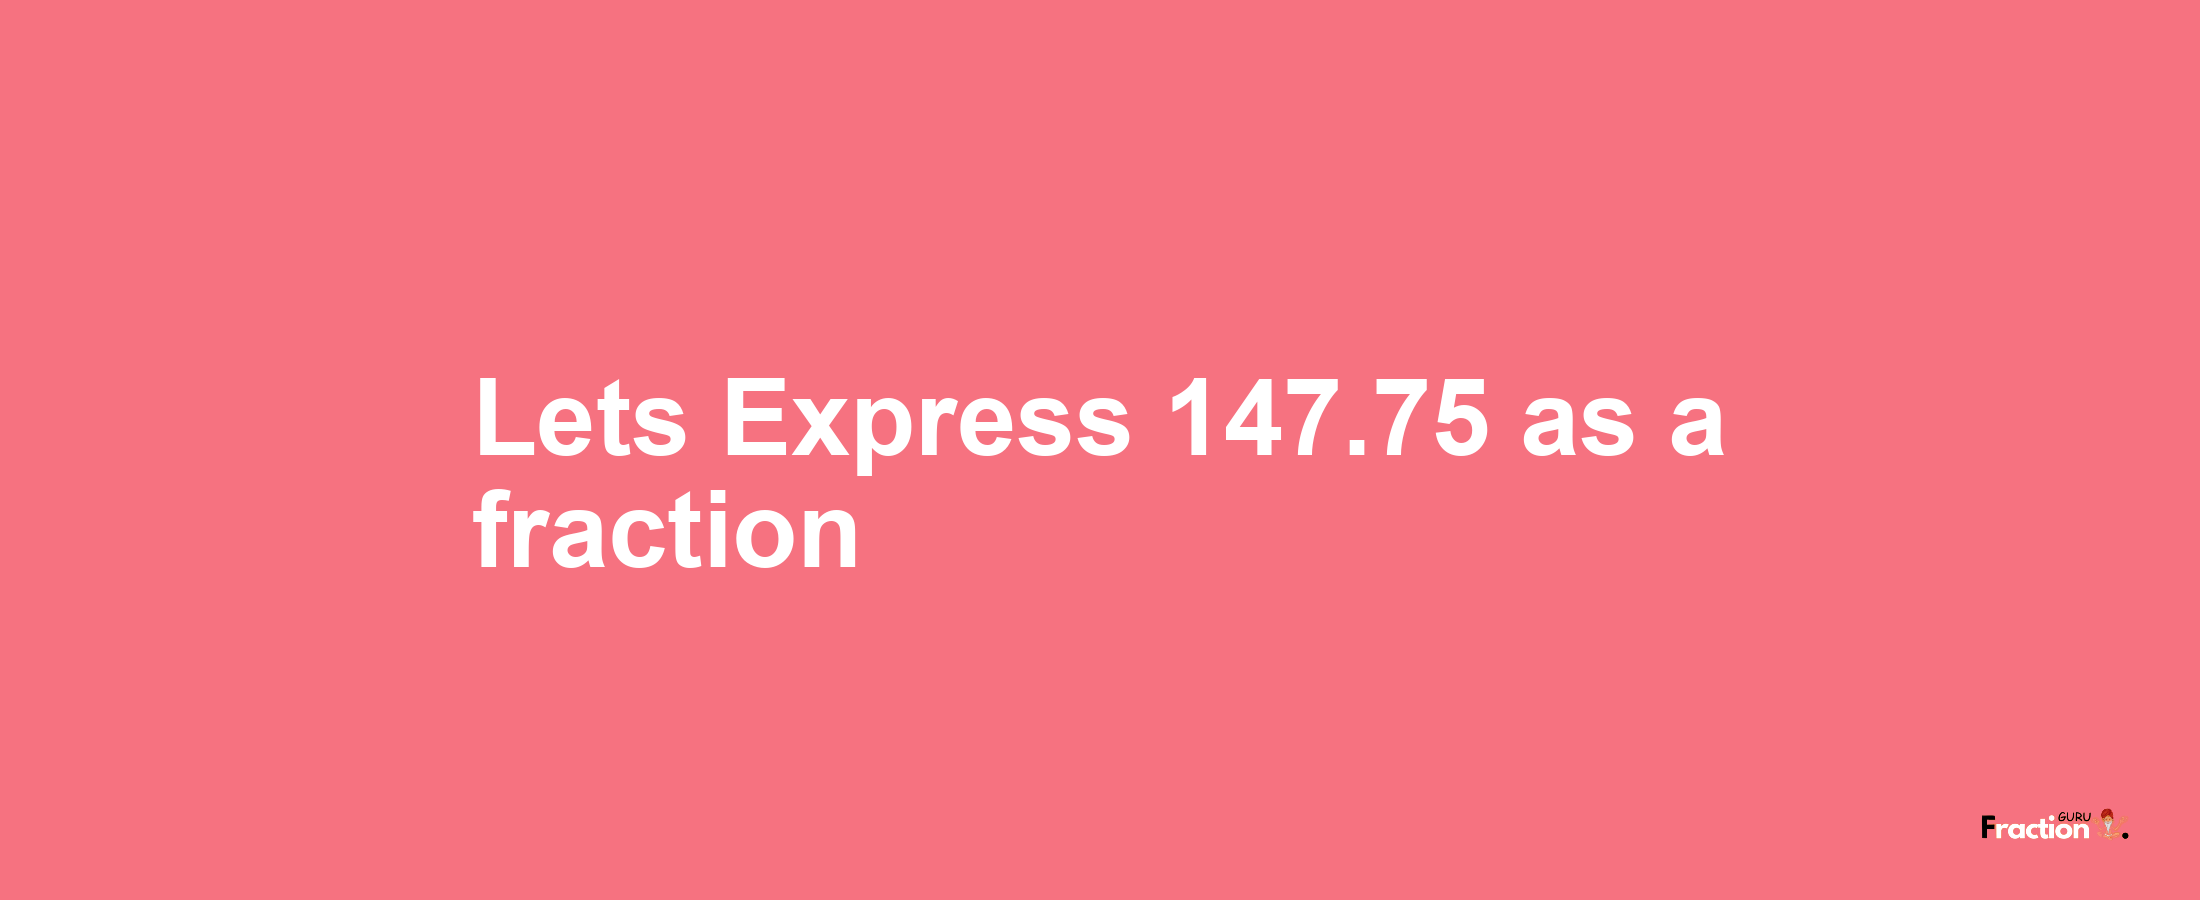 Lets Express 147.75 as afraction